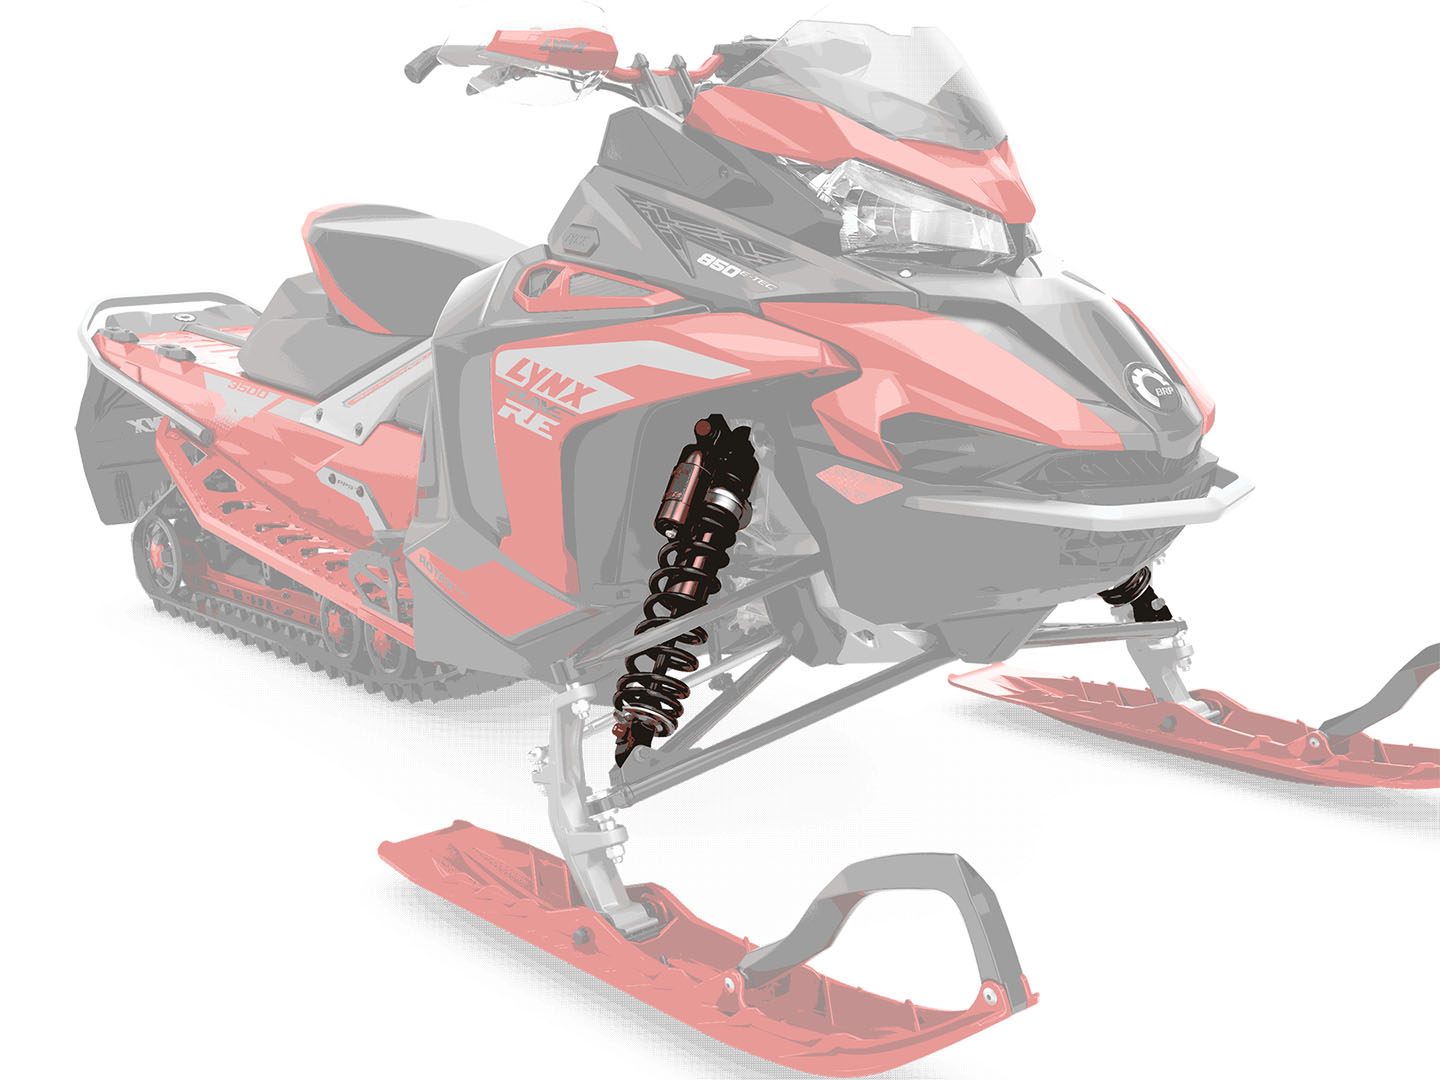 MORE STABILITY: LFS+ front suspension - The new LFS+ front suspension features more suspension travel and wider, 1097 mm ski stance, providing the Lynx Rave sport snowmobile with improved control and flatter cornering capability. - Photo 7